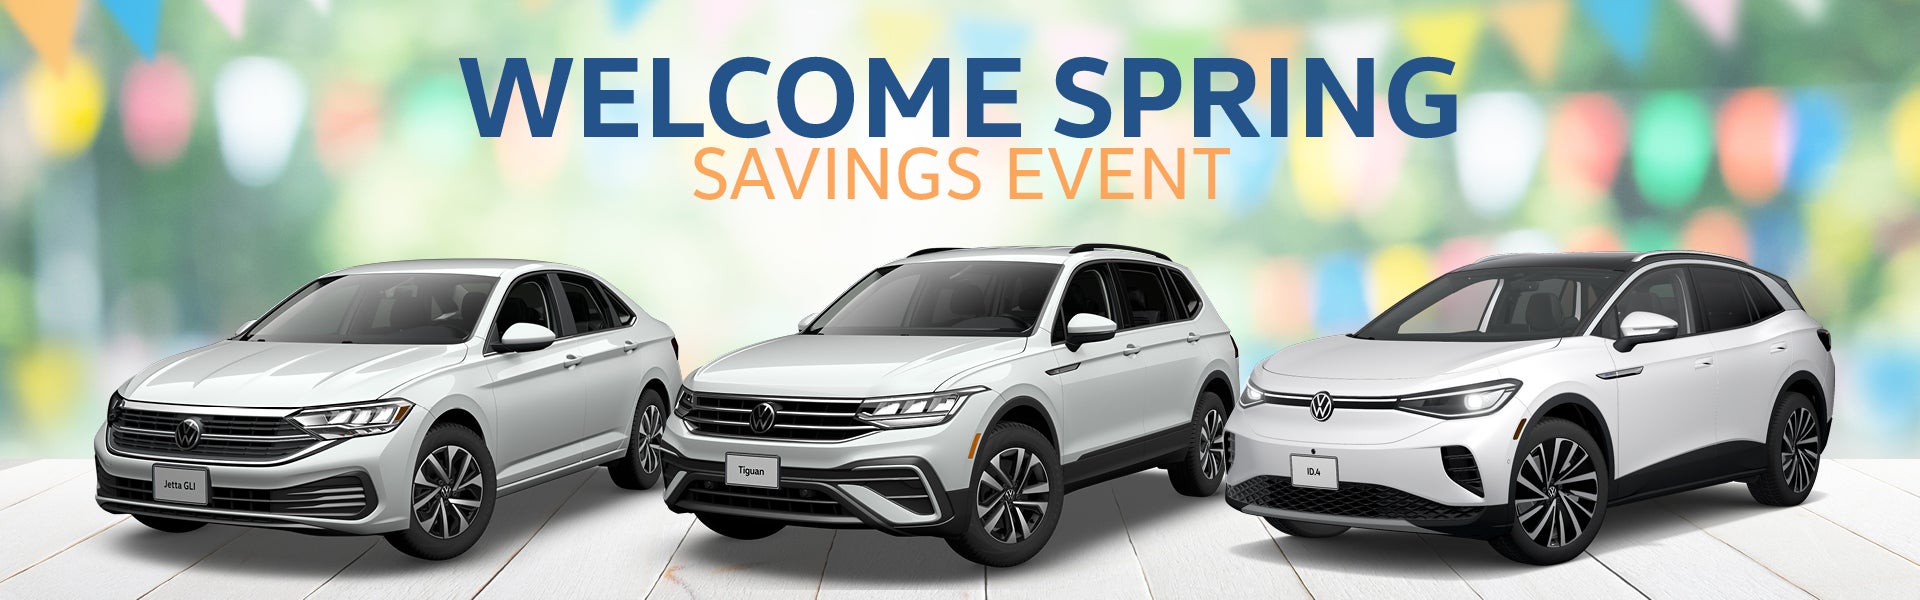 Welcome spring savings event